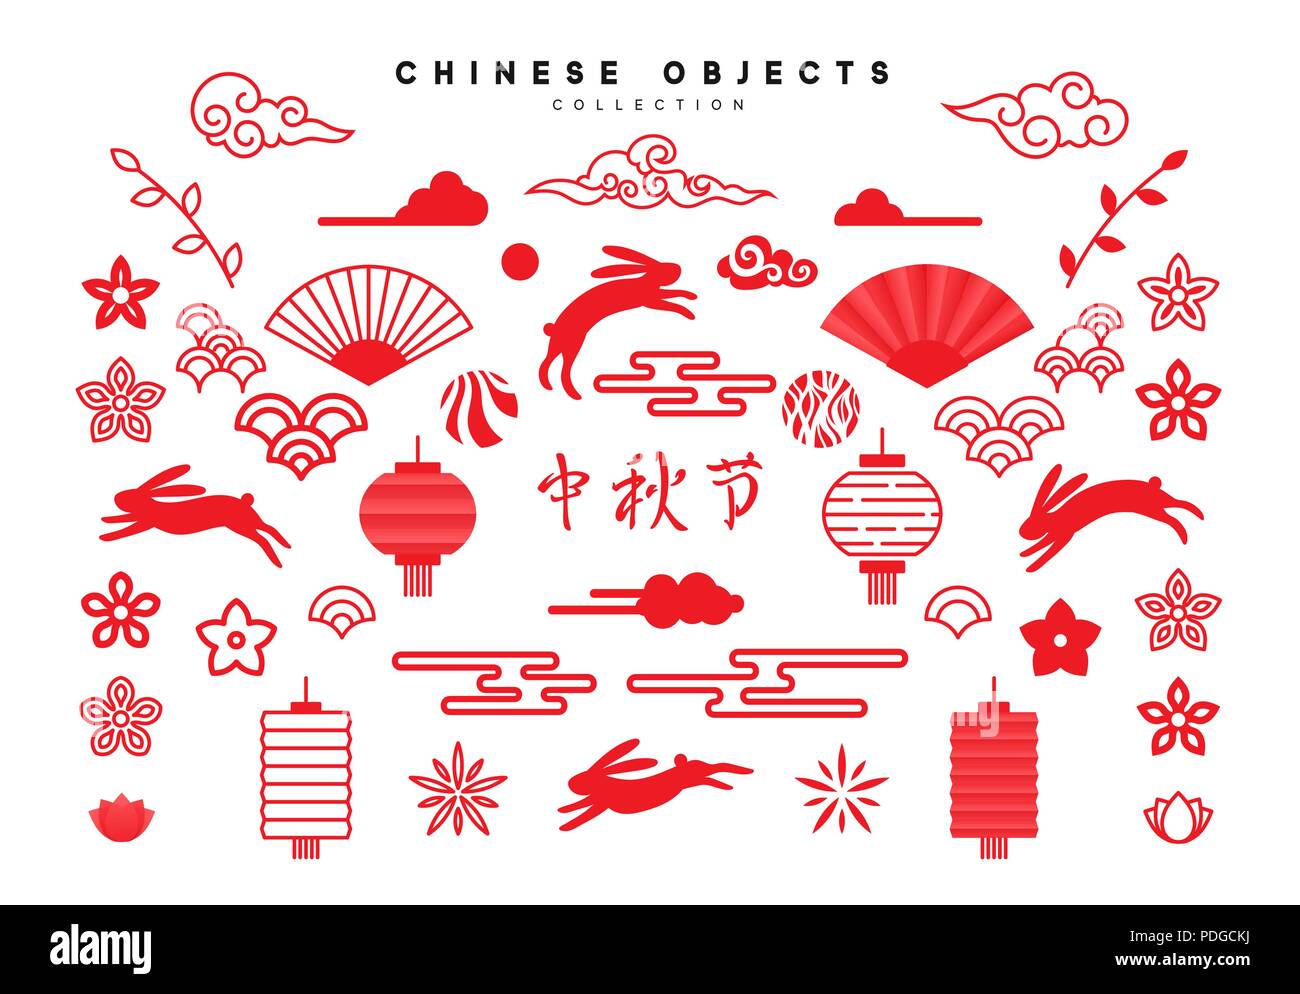 Ancient Chinese Designs And Patterns